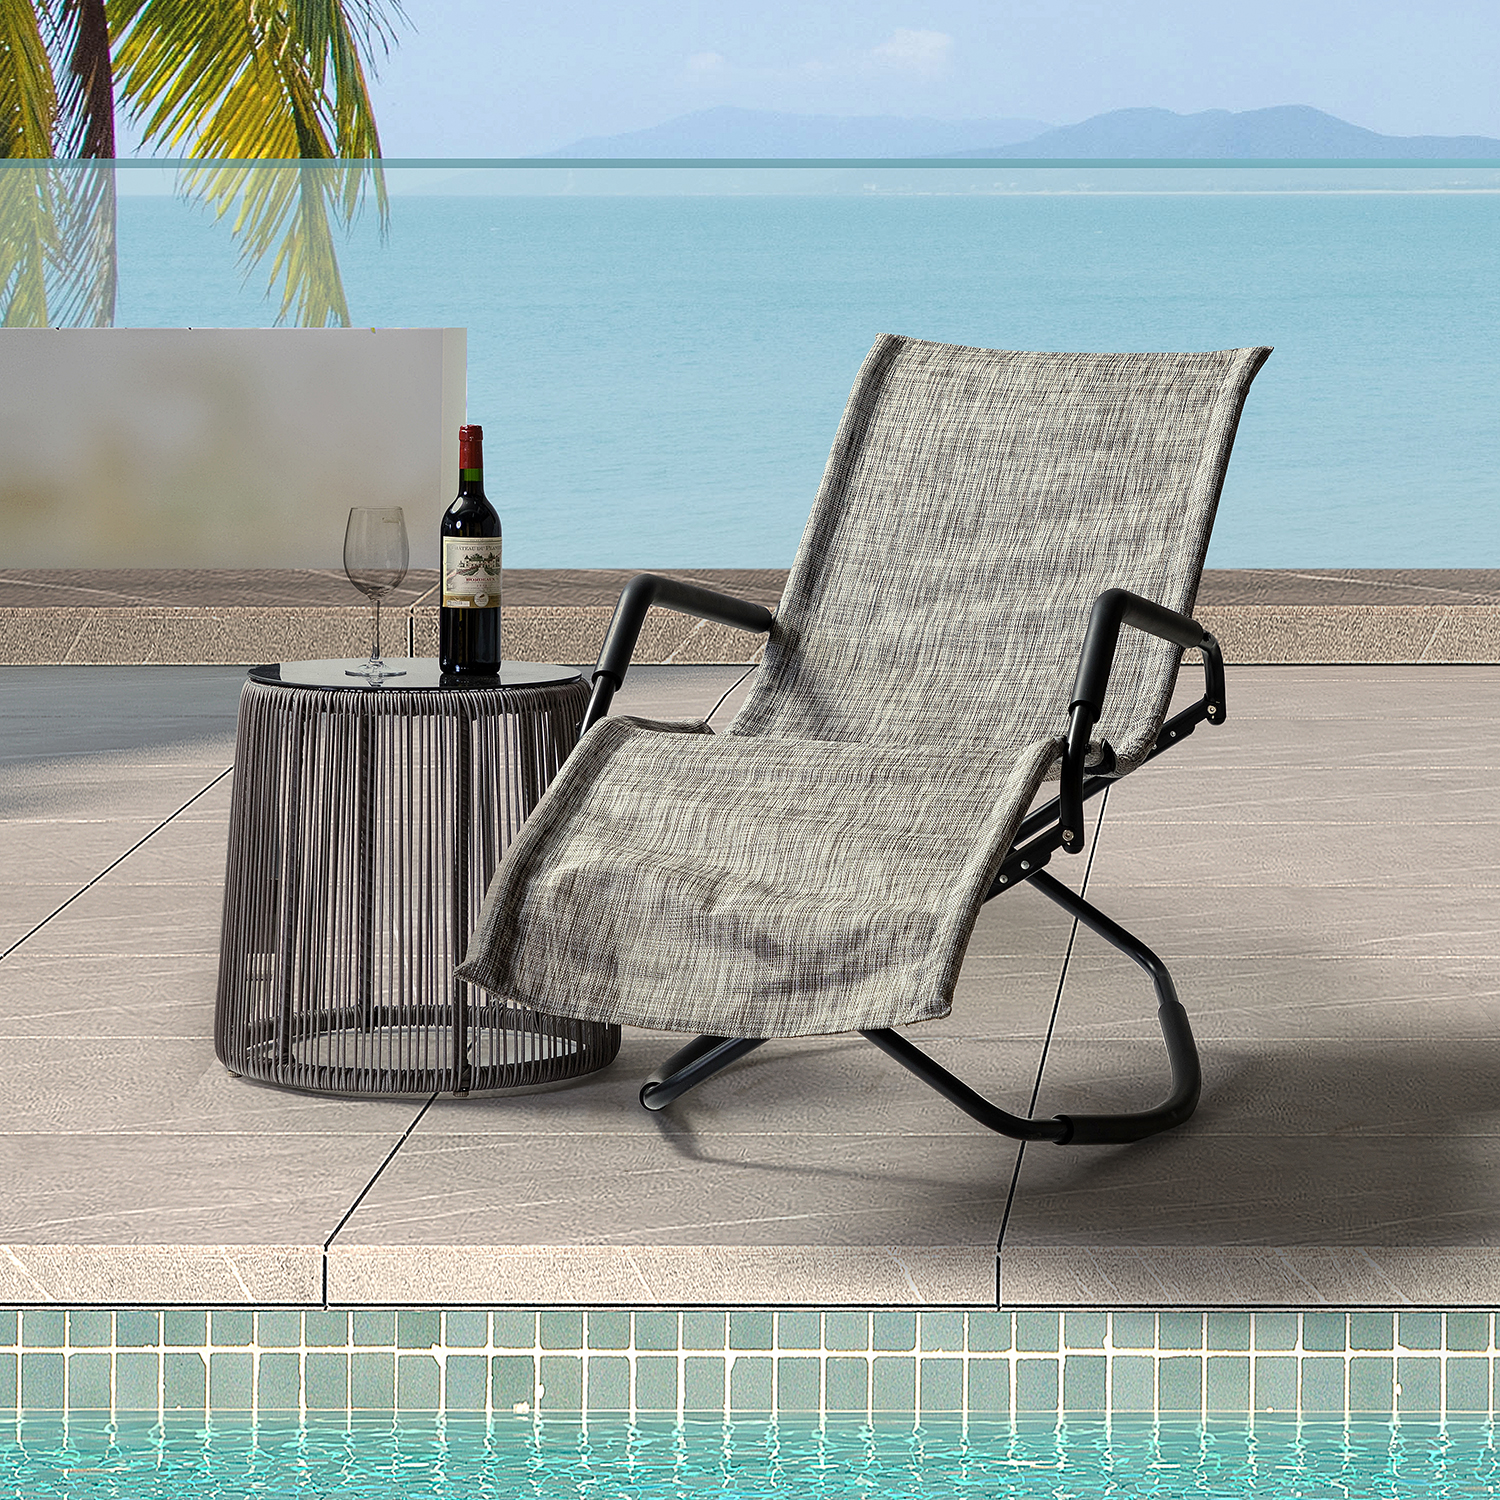 SYNGAR Lounge Chaise Chair, Folding Portable Chaise Chair for Outdoor, Patio Rocking Reclining Chair with Lightweight Design, Camping Beach Chair with Armrest, Lounge Chair for Pool, Lawn, Deck, D7846 - image 1 of 10